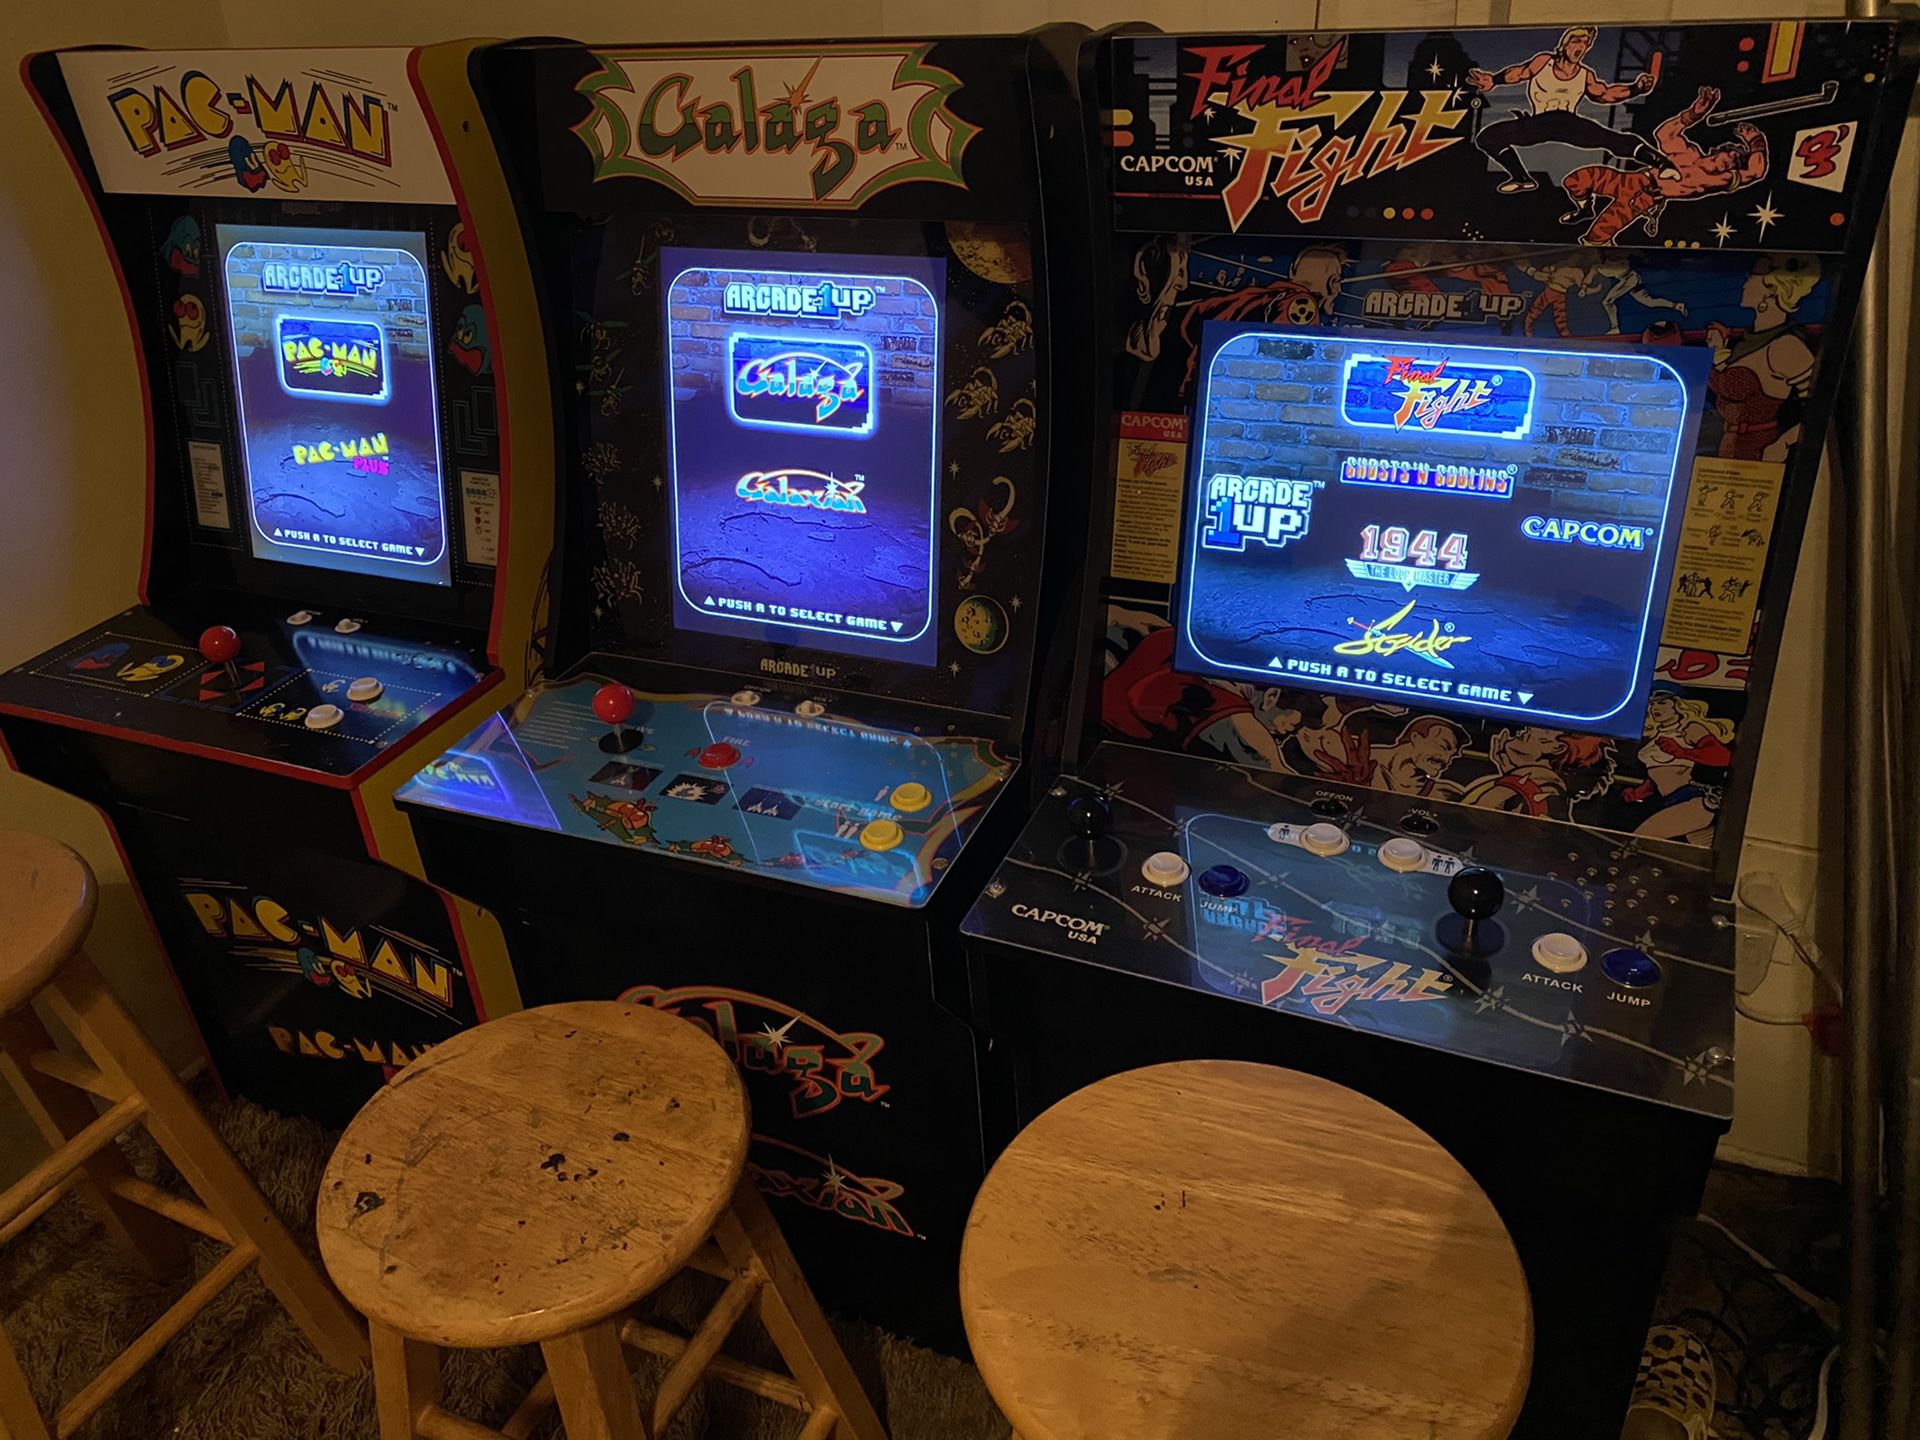 I got 3 arcade games in really good condition They work perfect... they’re a little smaller than the original ones there like 5 feet... asking 680 fo